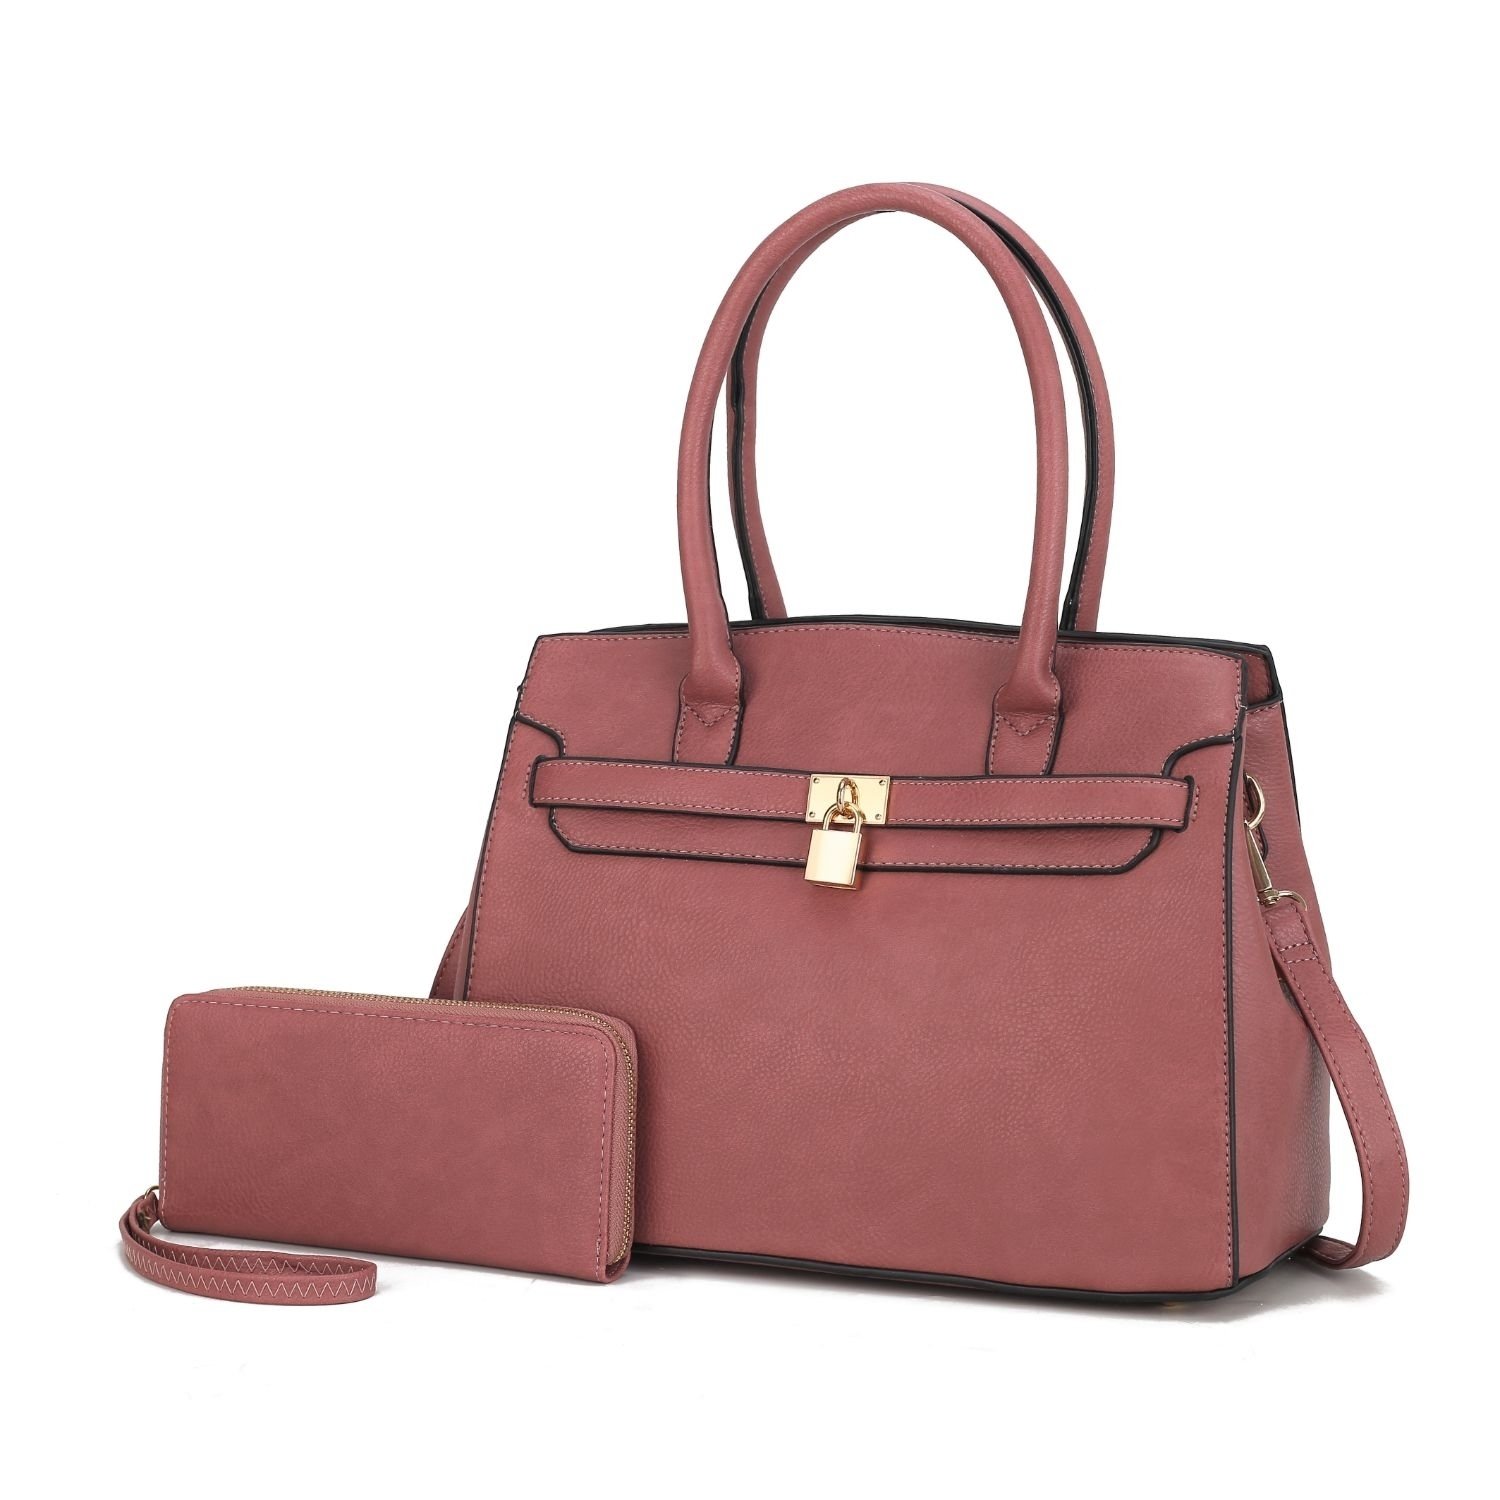 MKF Collection Bruna Satchel Handbag With A Matching Wallet By Mia K -2 Pieces Set - Mauve